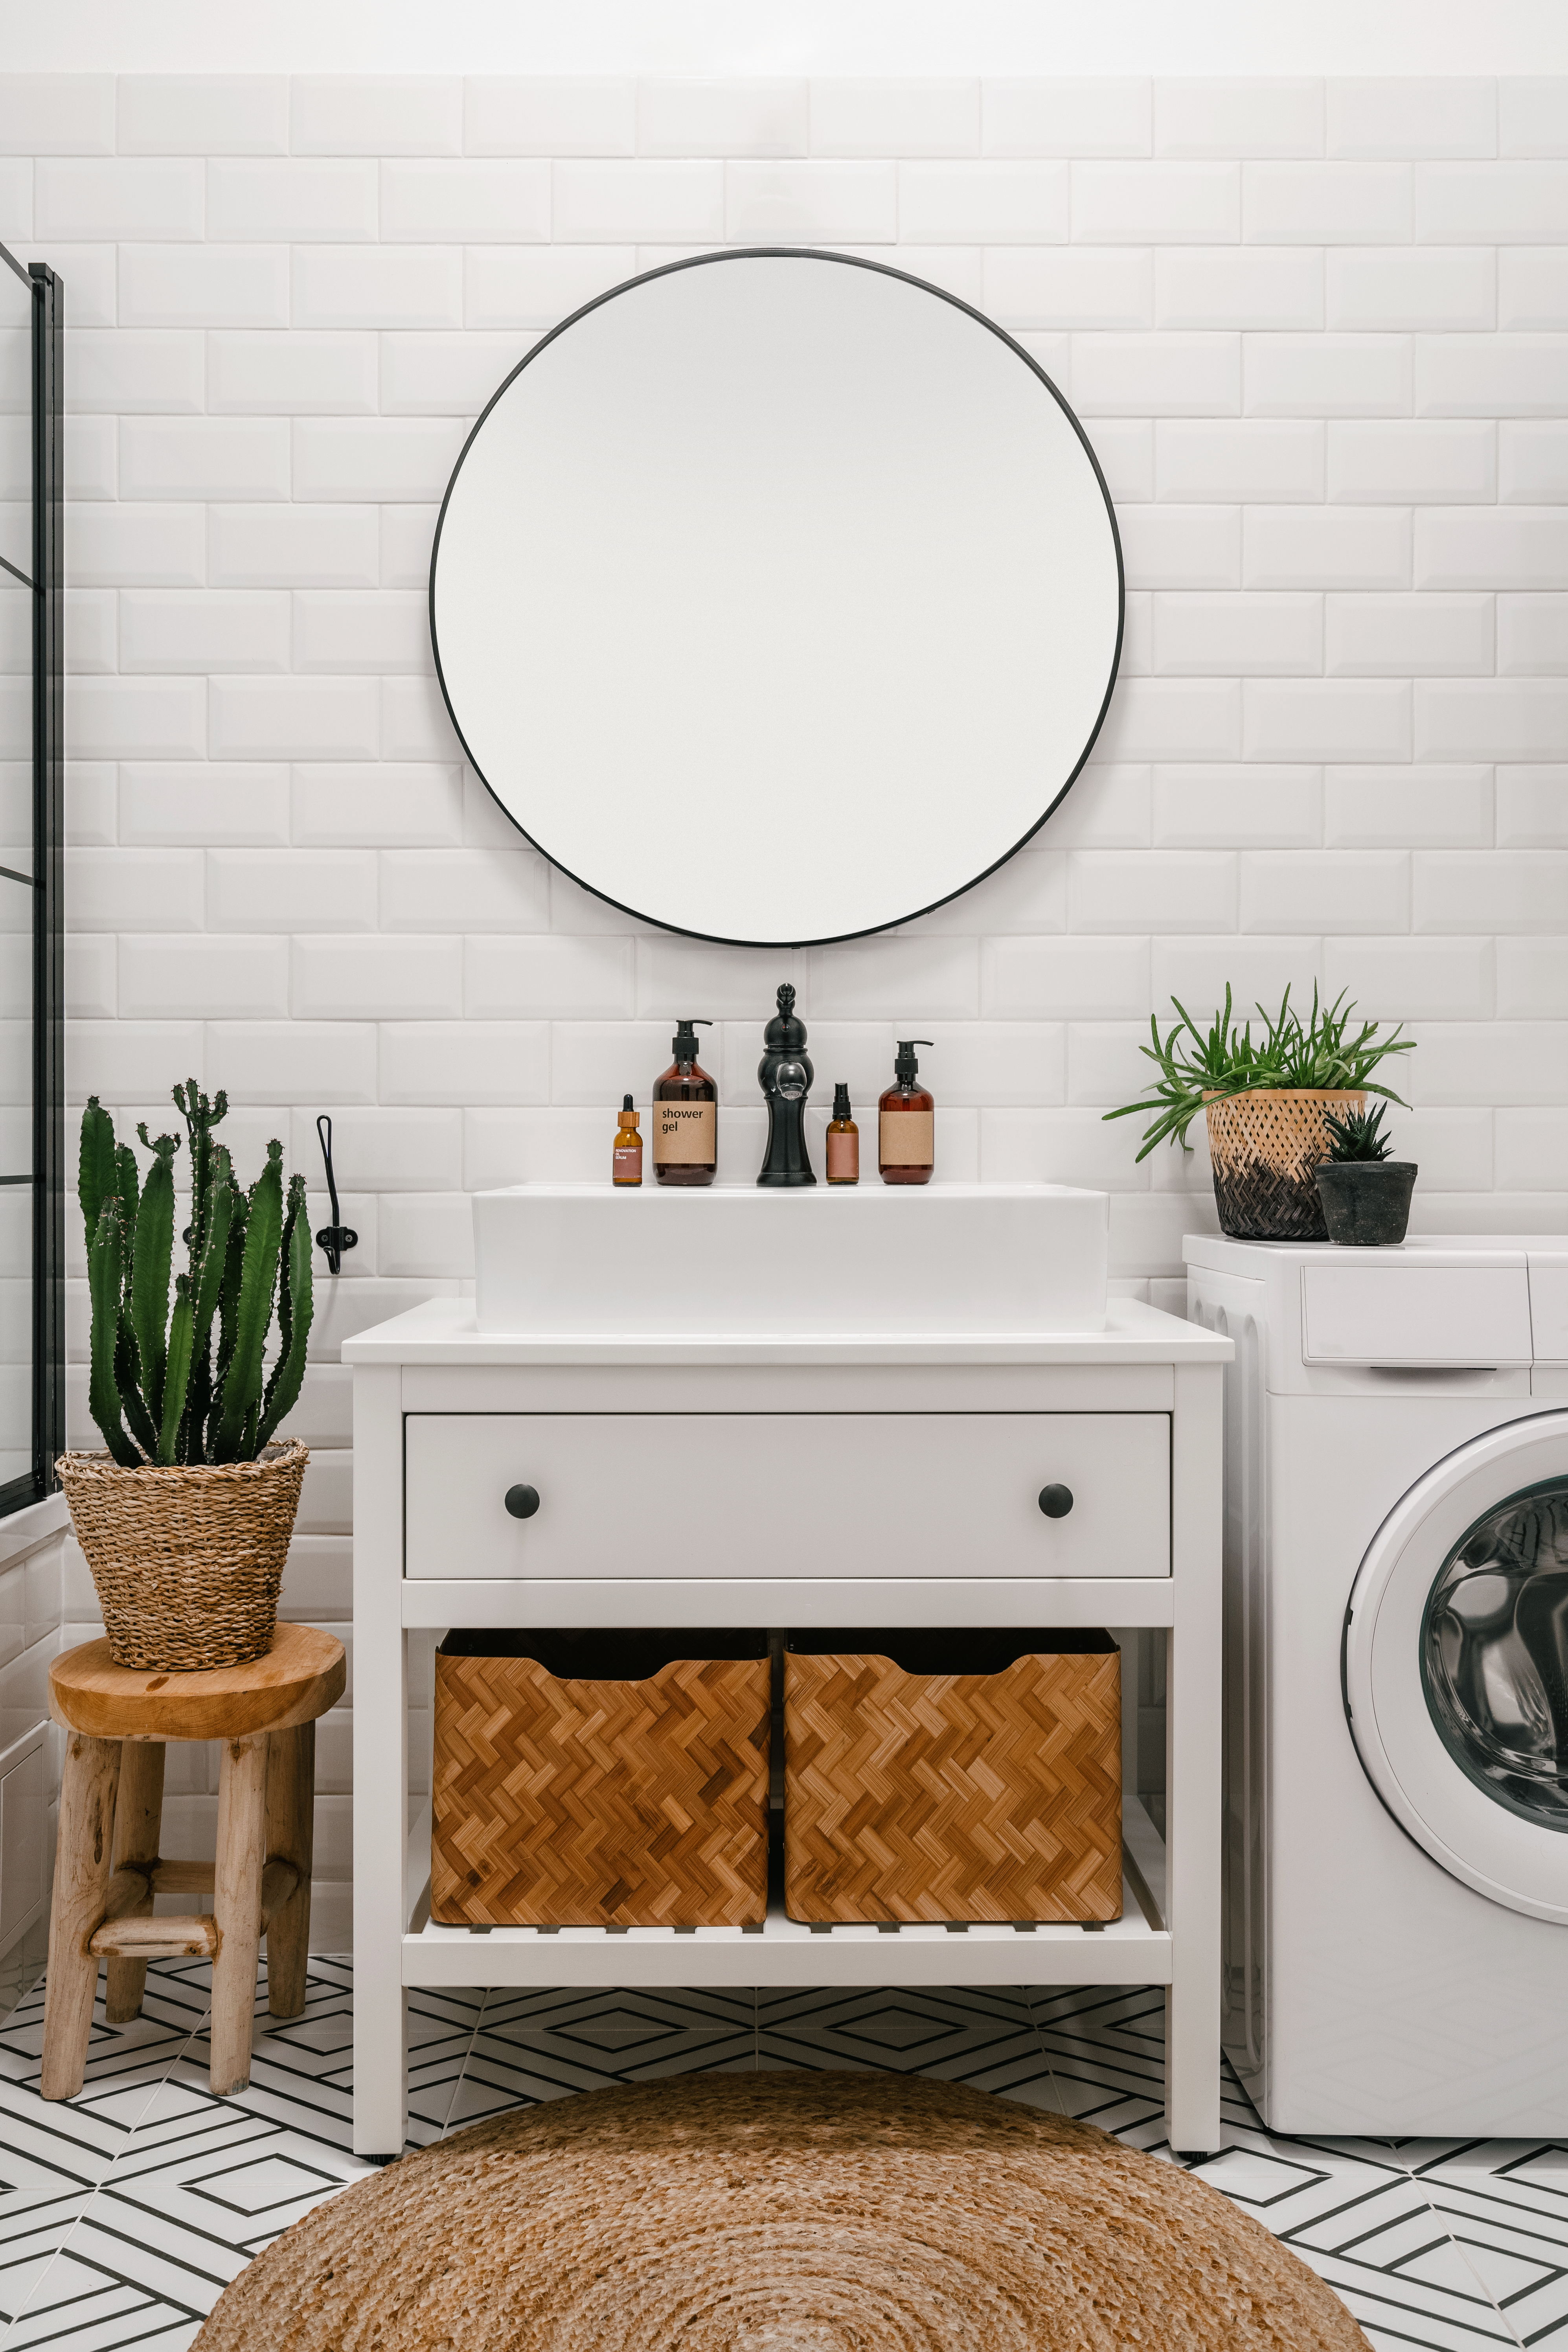 A modern bathroom with a round mirror, sink vanity, woven baskets, and a washing machine next to a potted plant